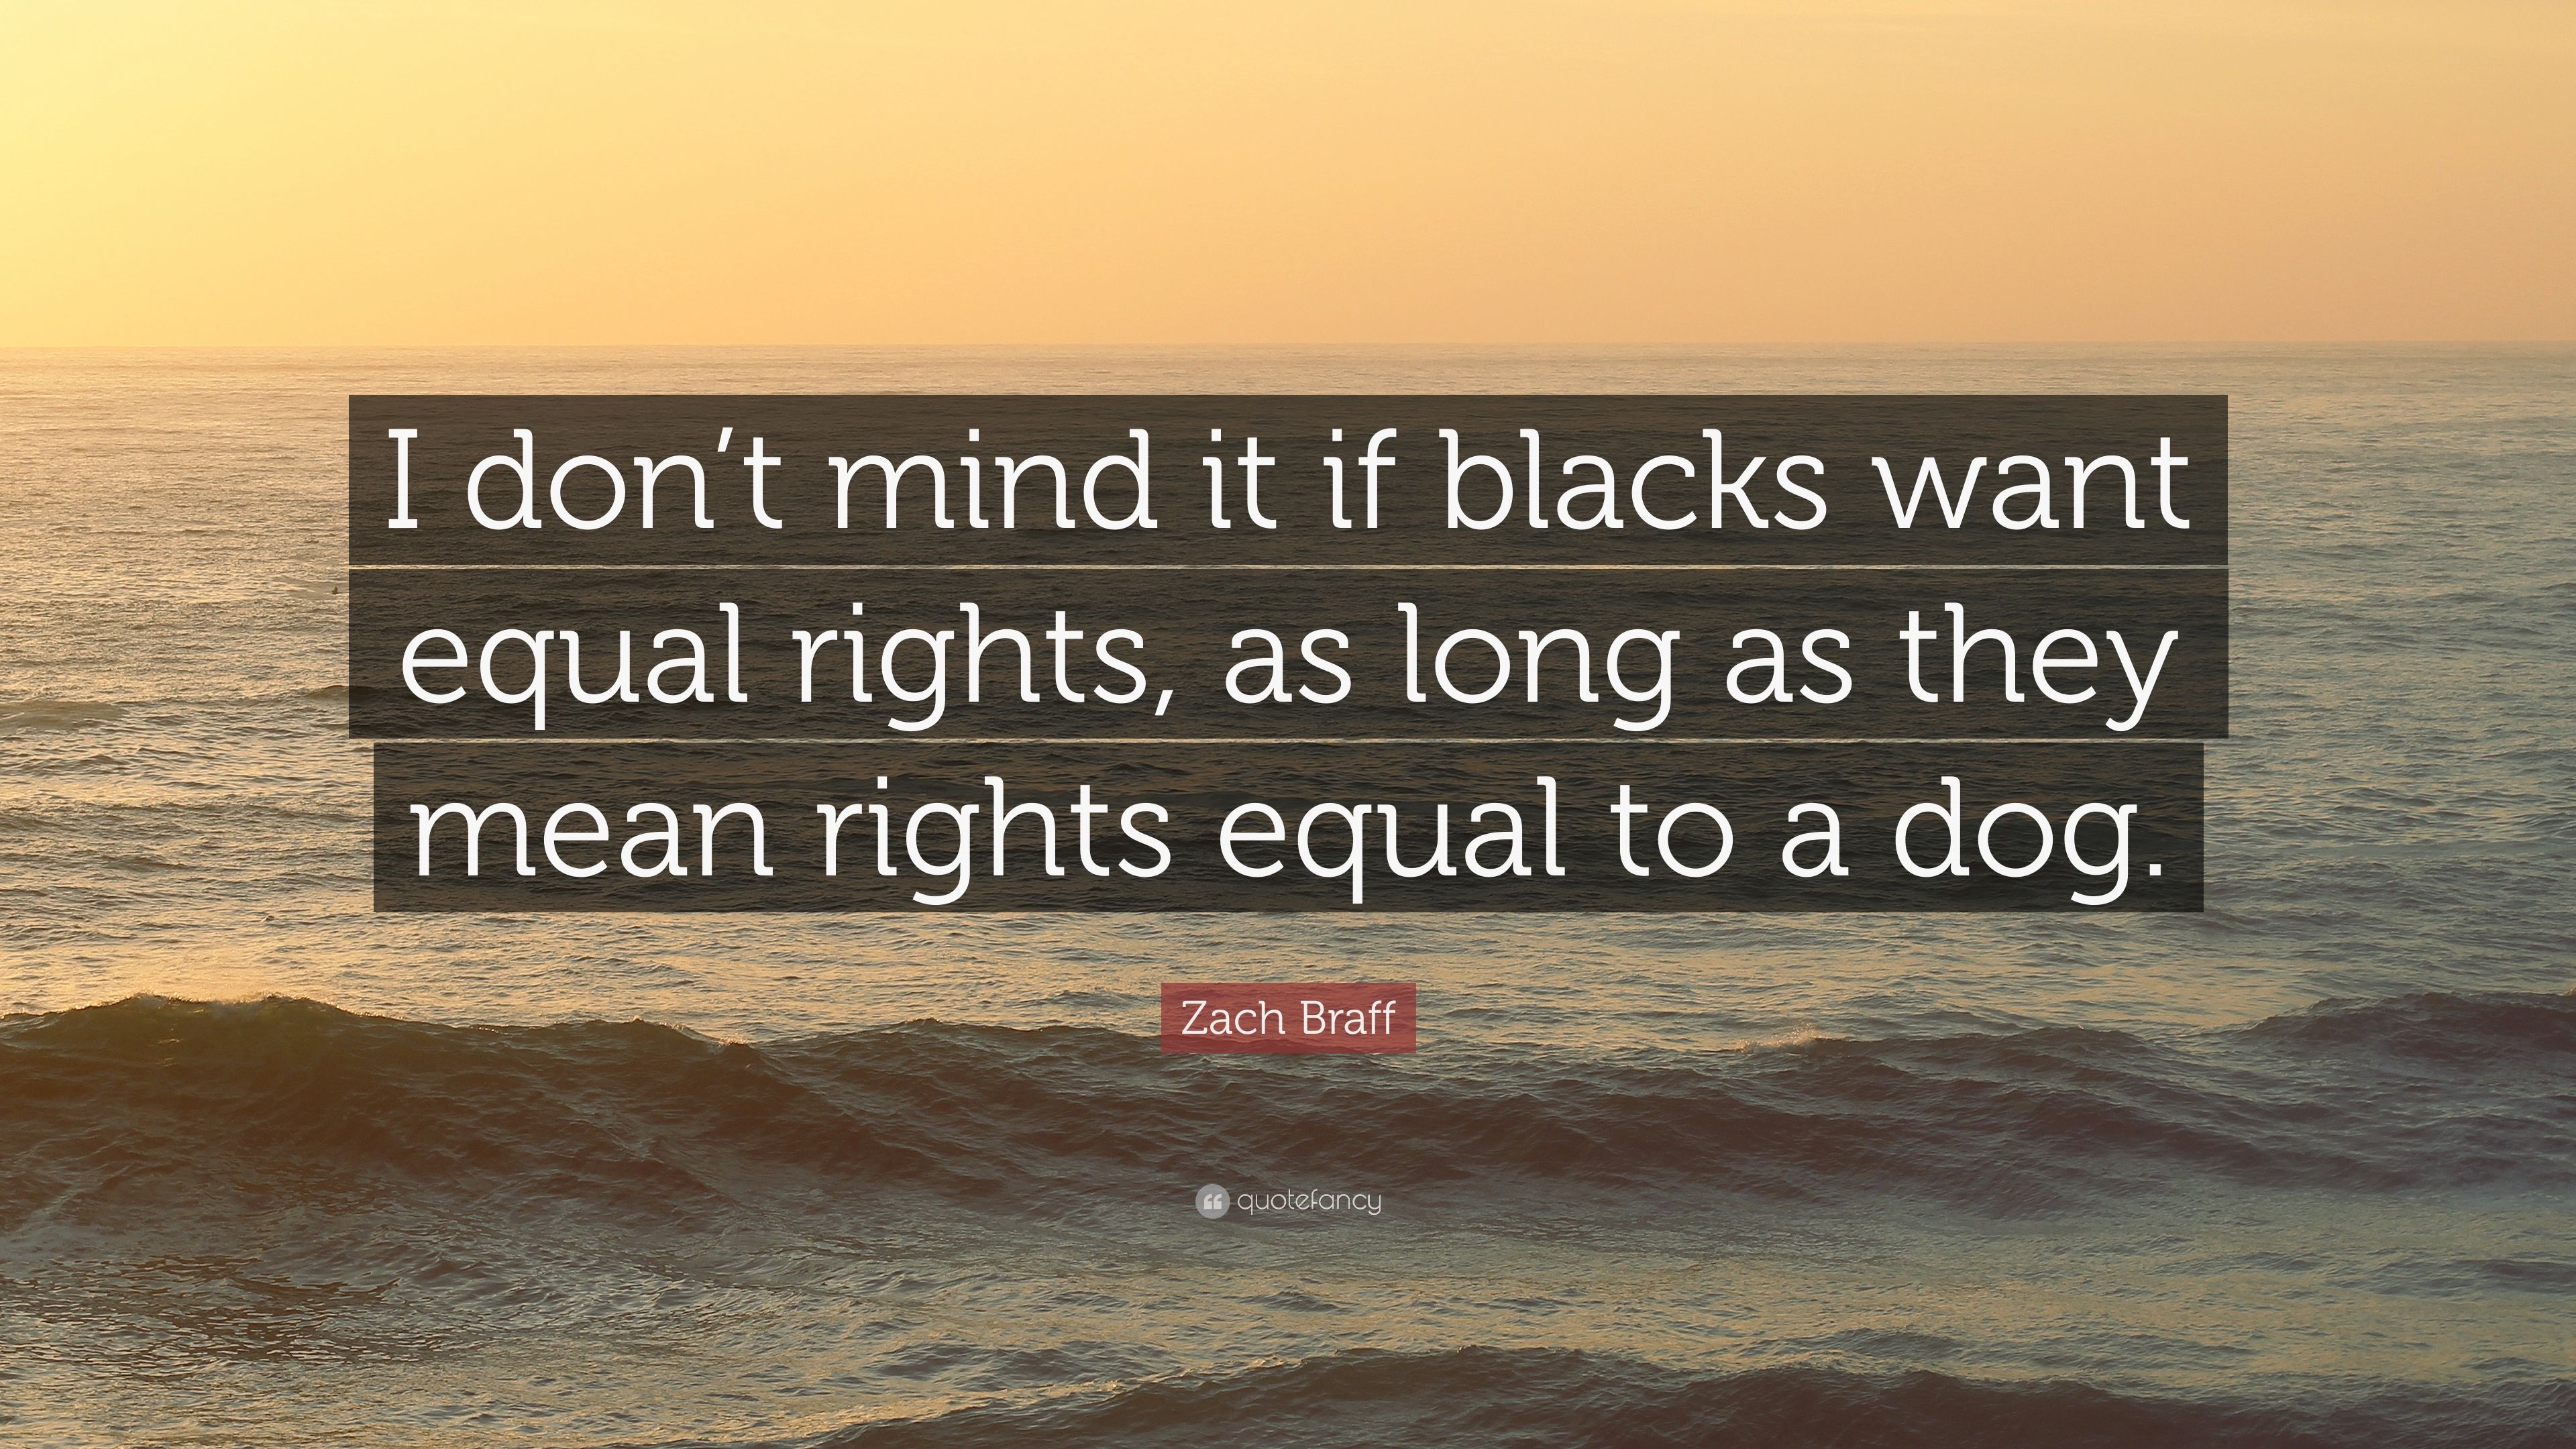 Zach Braff Quote: “I don't mind it if blacks want equal rights, as